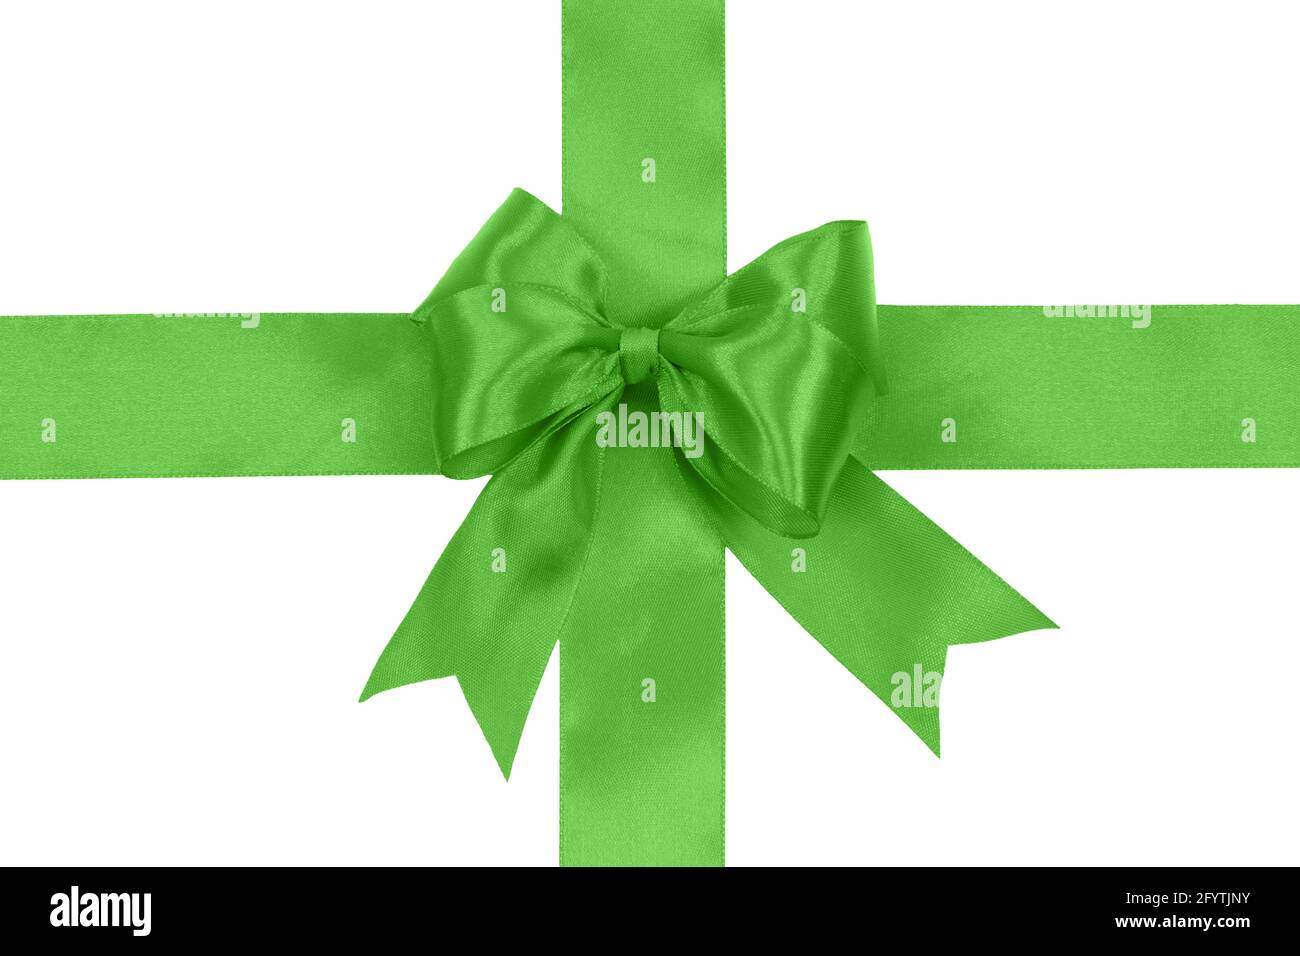 Shiny green satin bow on a white background with no shadows in close-up. PNG file with transparent background. Stock Photo